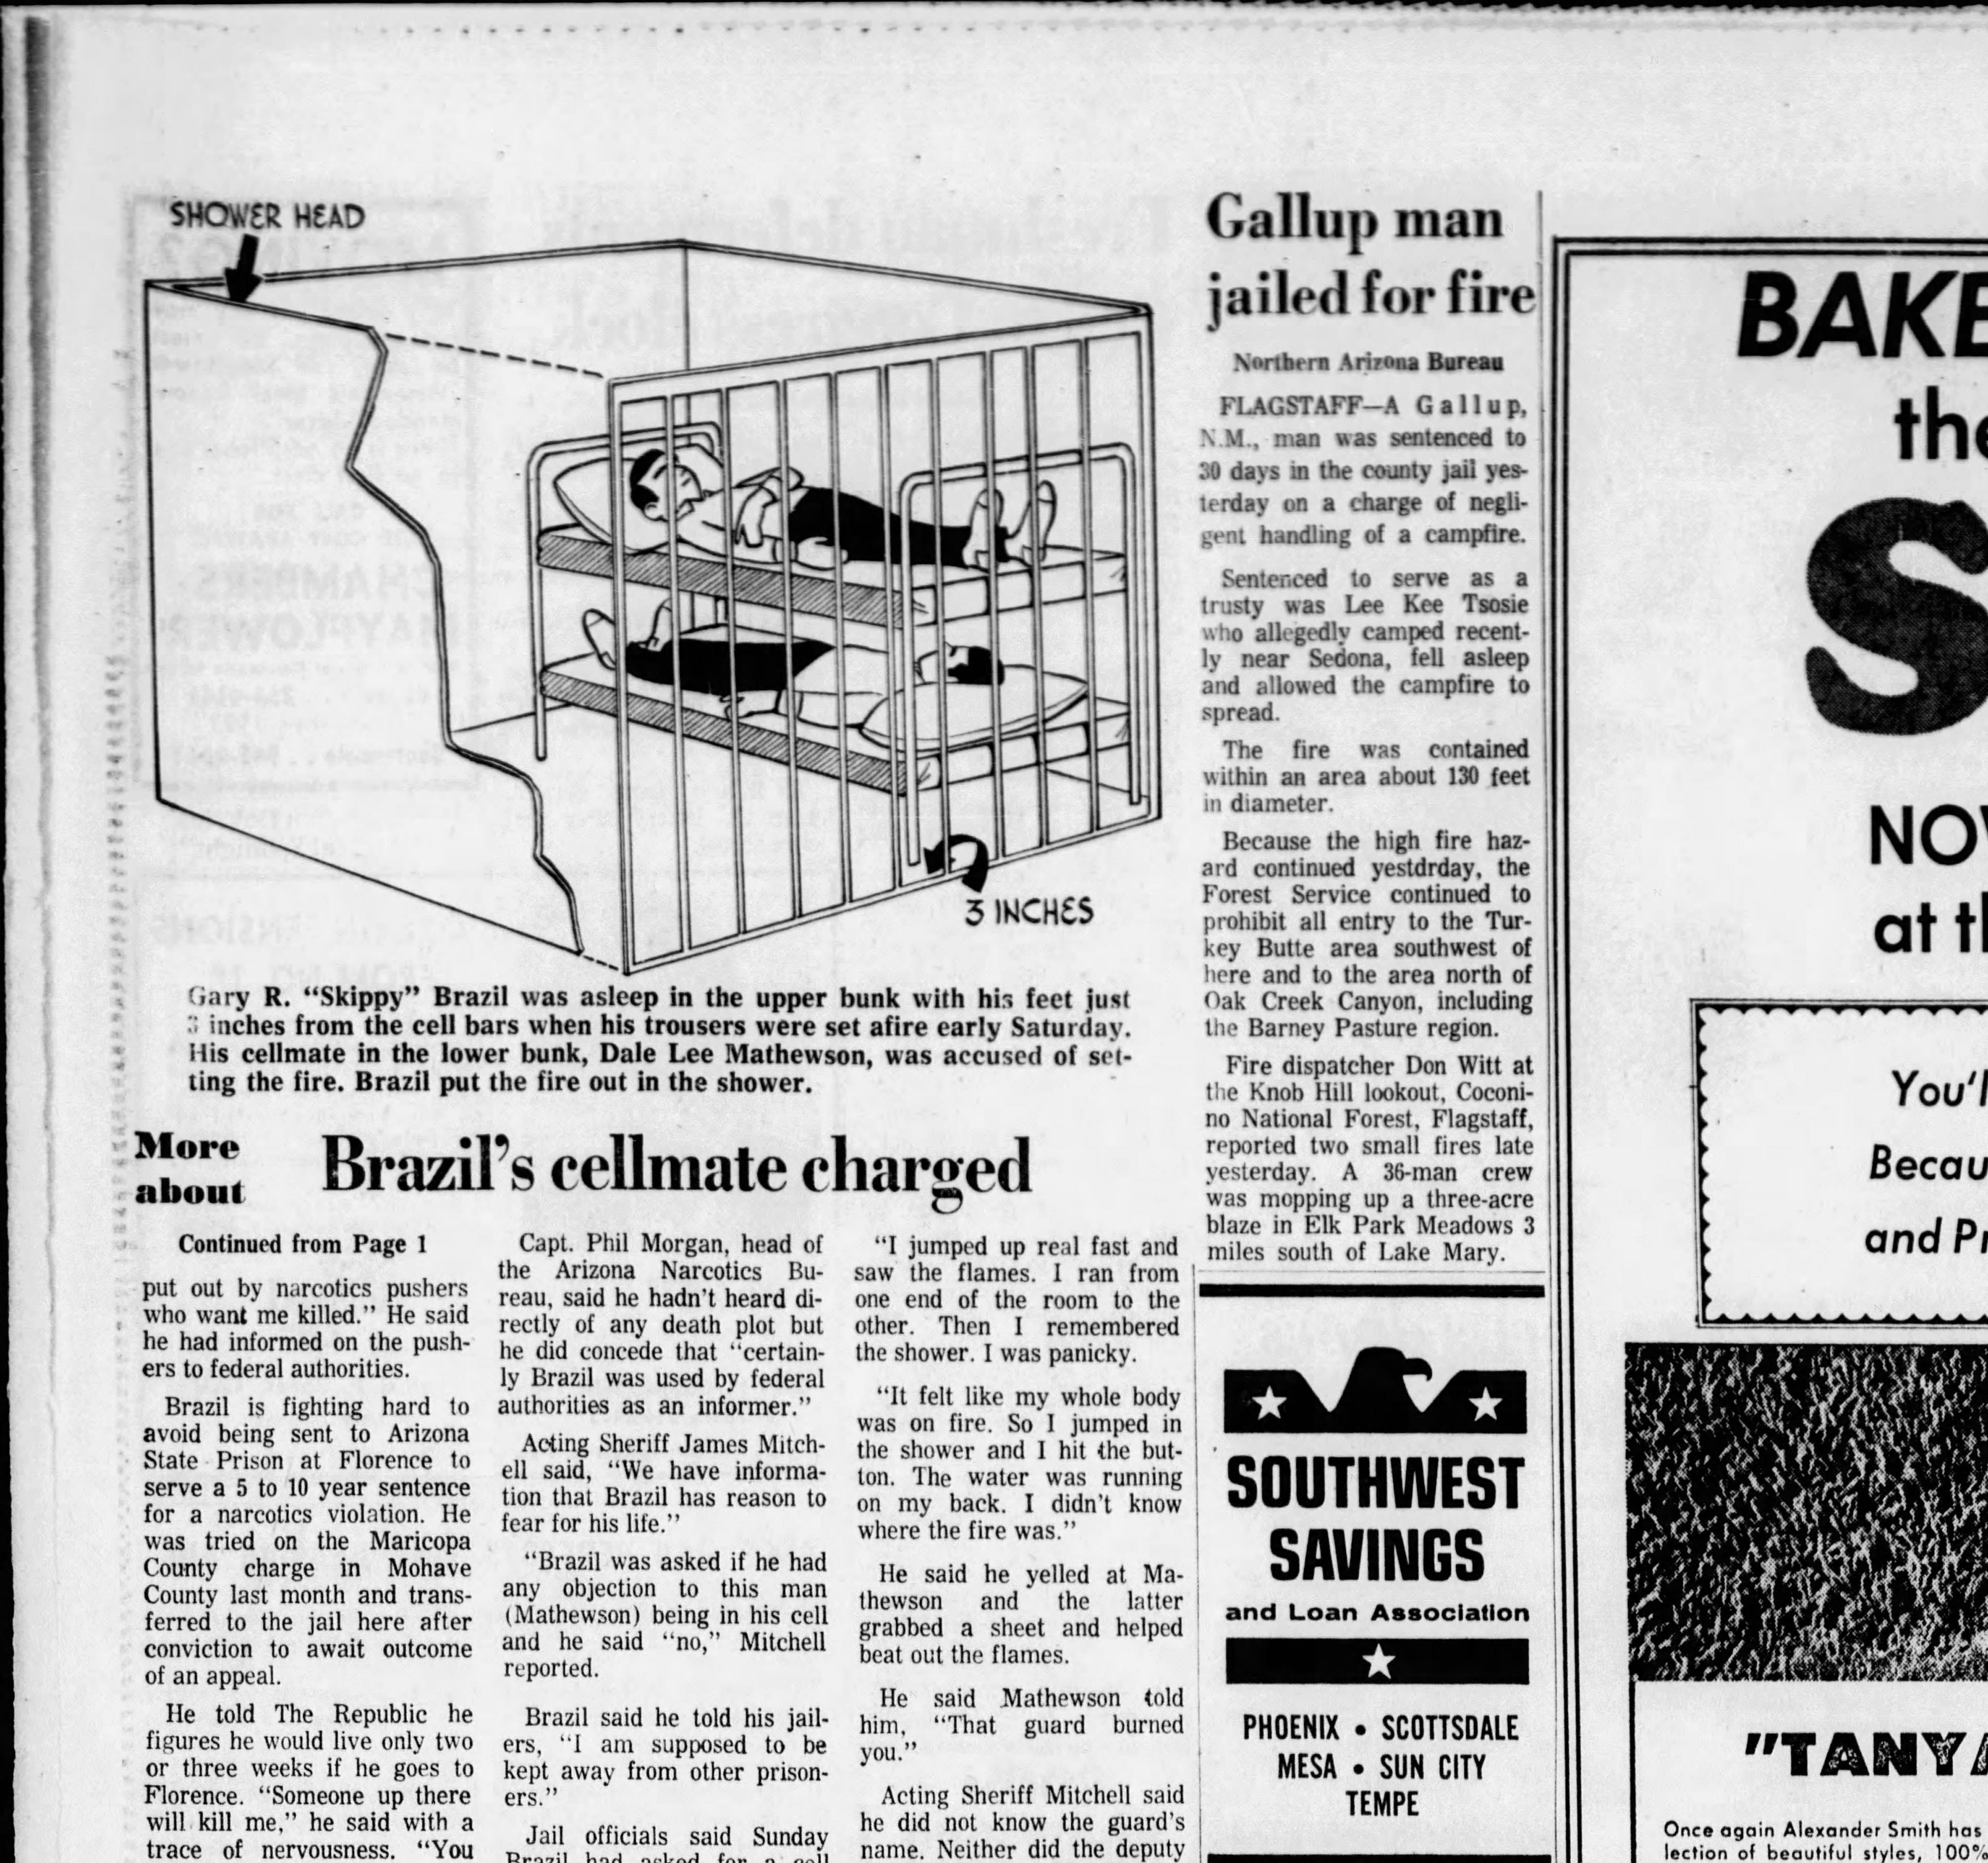 An 1970 Republic illustration shows the layout of the cell where the drug informant Gary "Skippy" Brazil was set on fire.